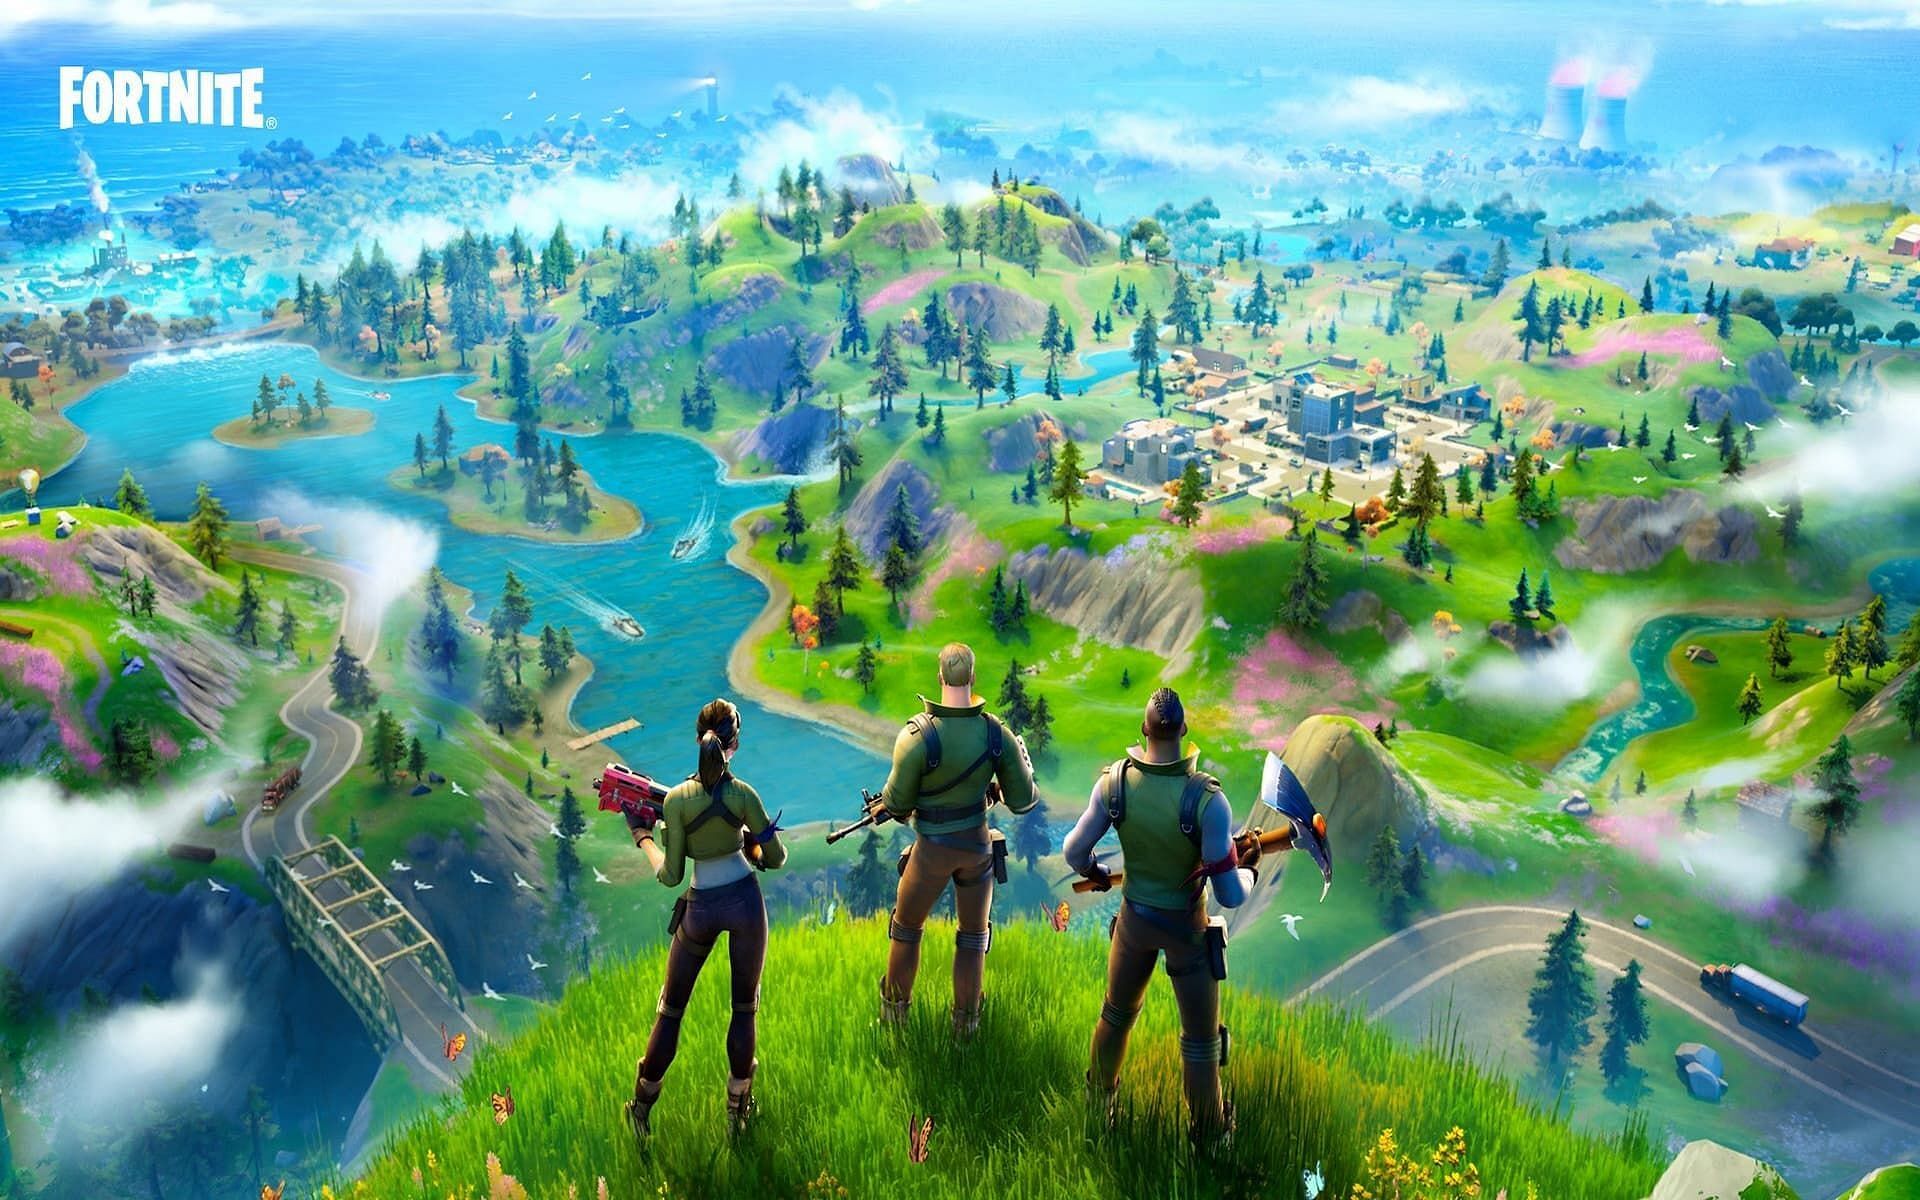 Epic's new update squanders all they held in their palms, Fortnite